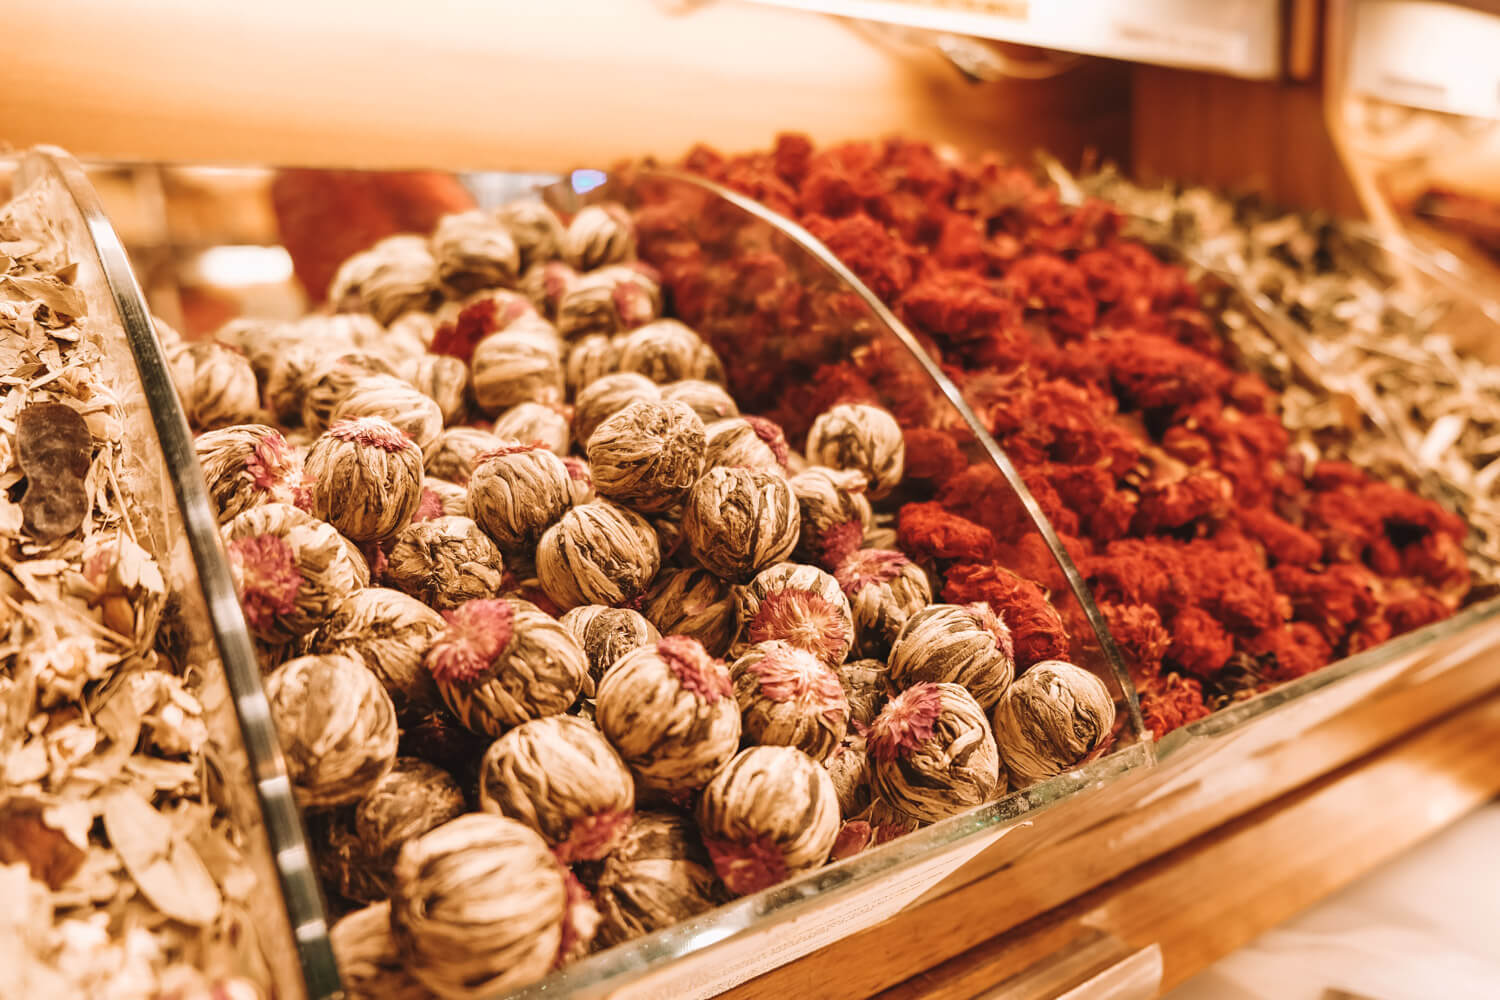 Exploring the spice markets in Istanbul